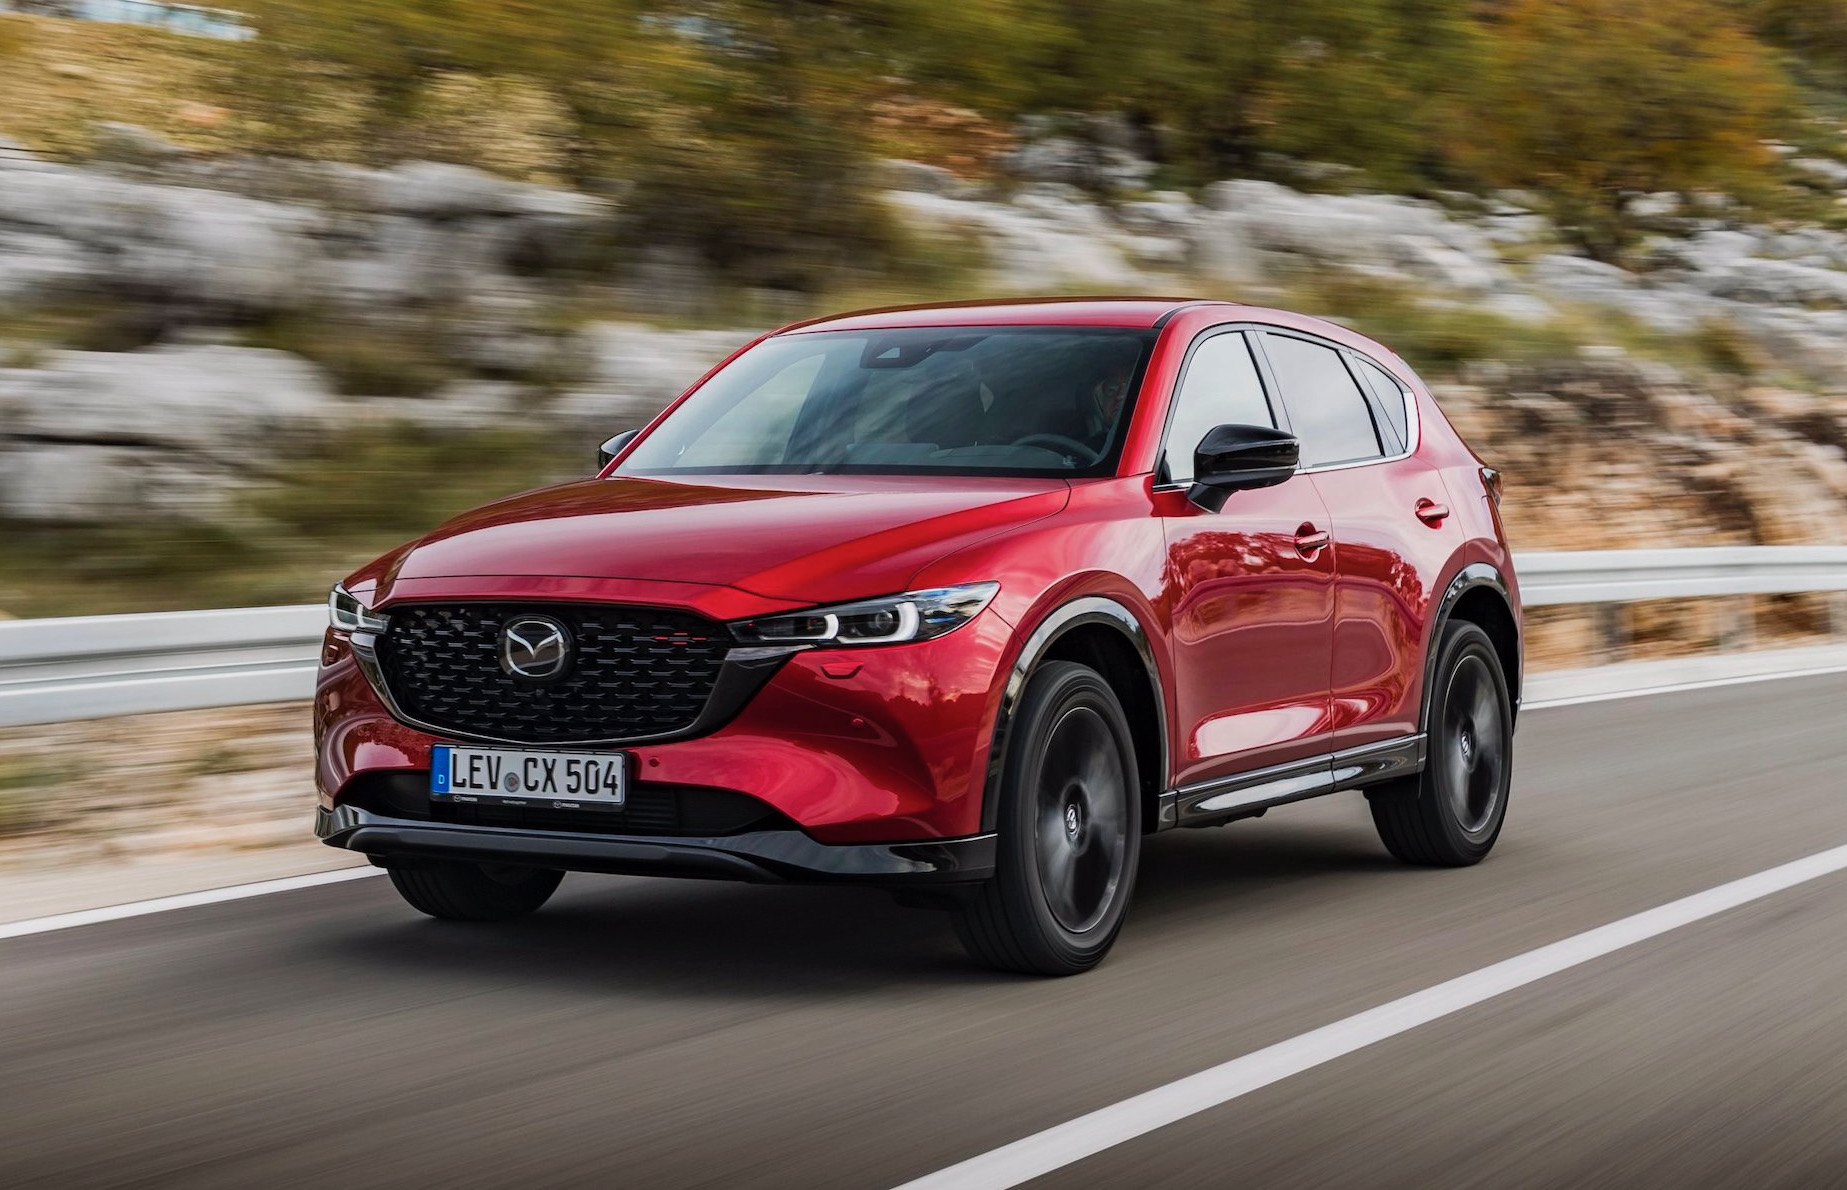 2022 Mazda CX-5 update now on sale in Australia, from $32,190